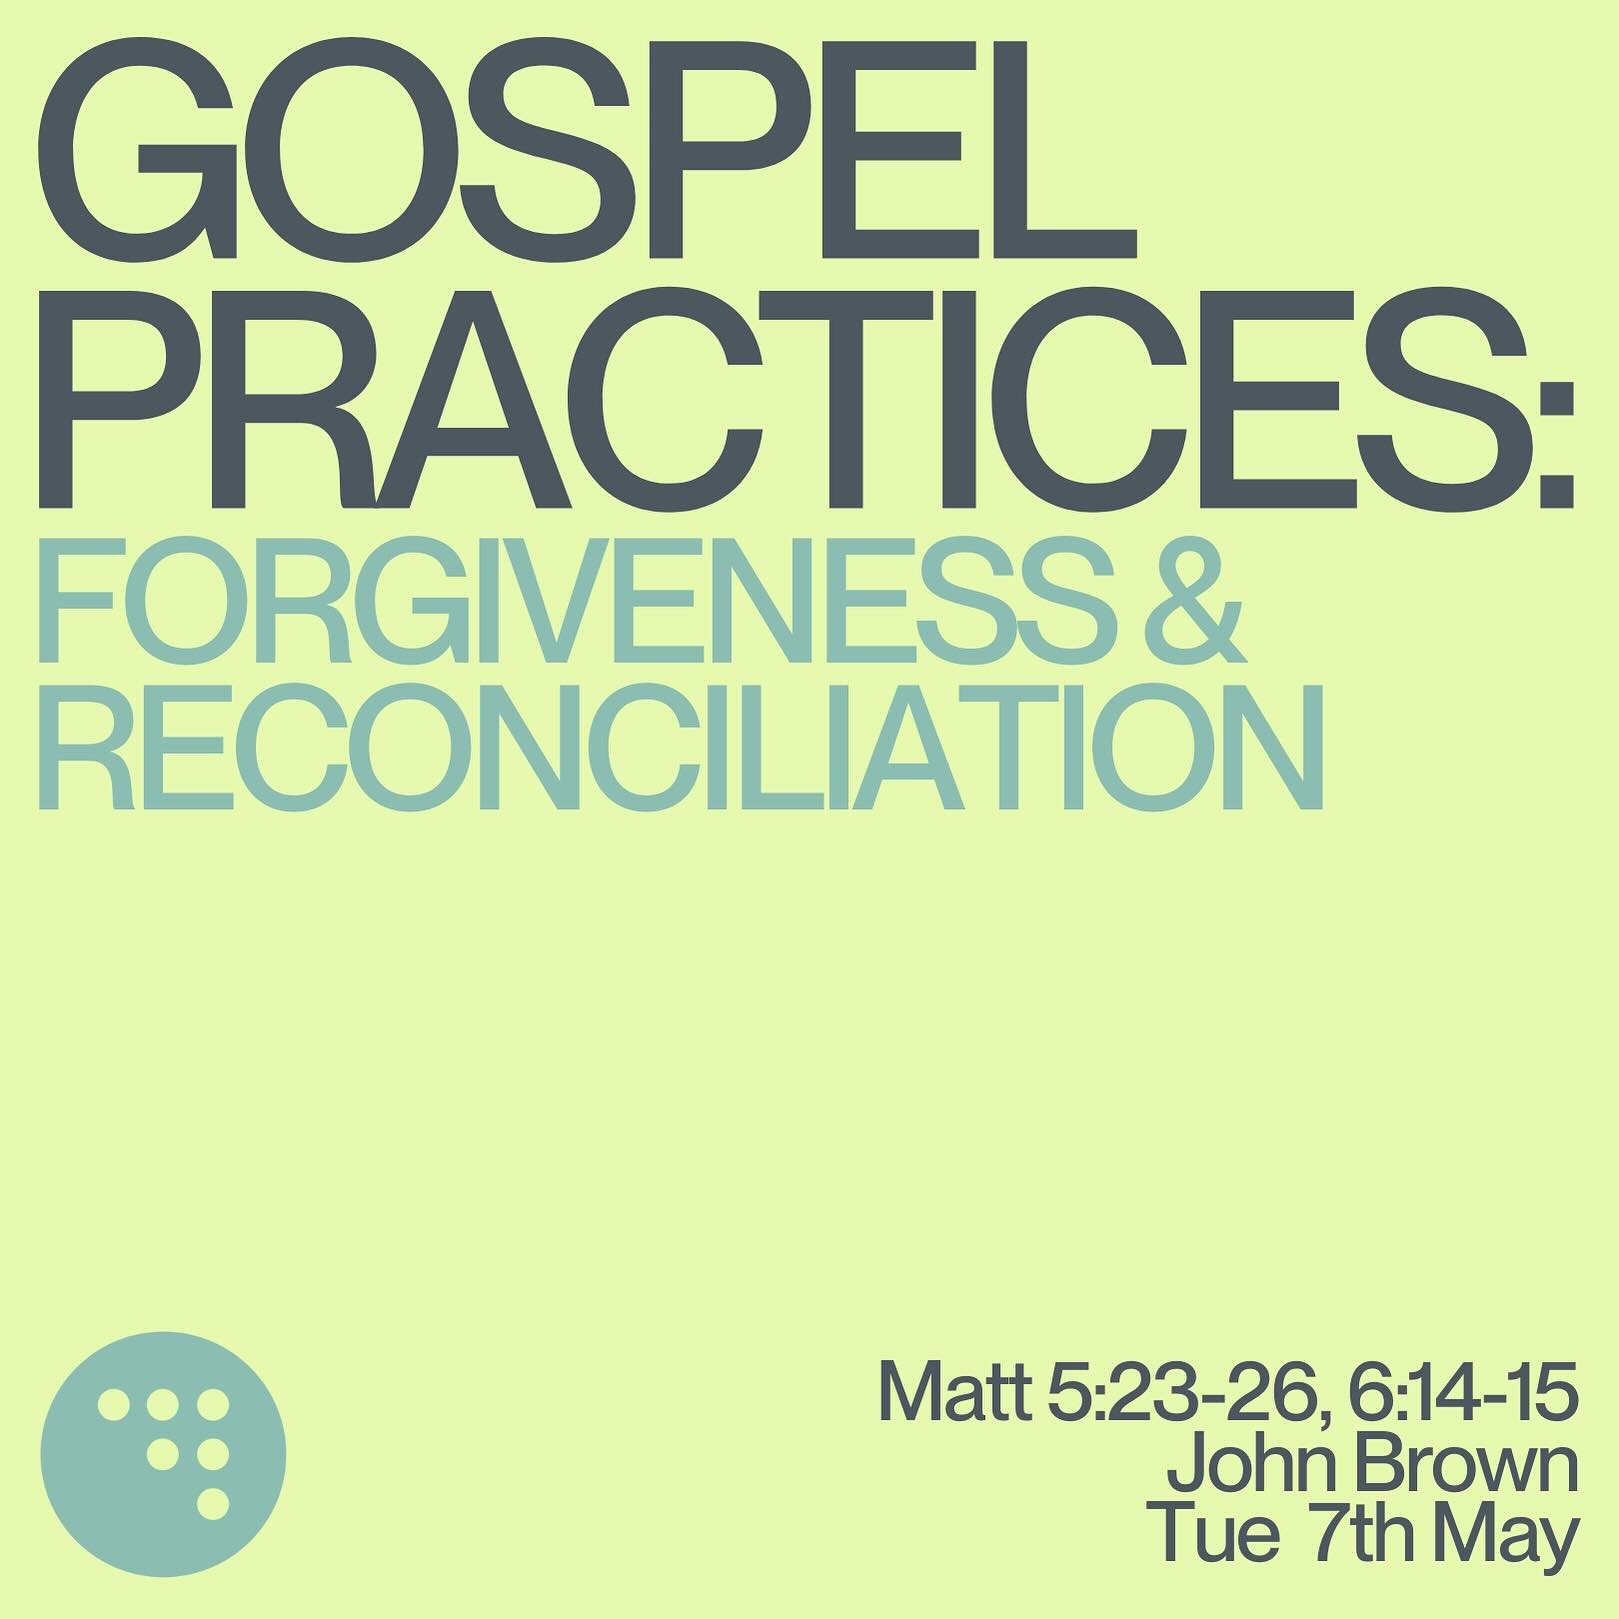 Another Tuesday, another Student Night!
John is continuing our series on Gospel Practices in the Sermon on the Mount, and tonight&rsquo;s practice is forgiveness and reconciliation.

#htcambridge #churchincambridge